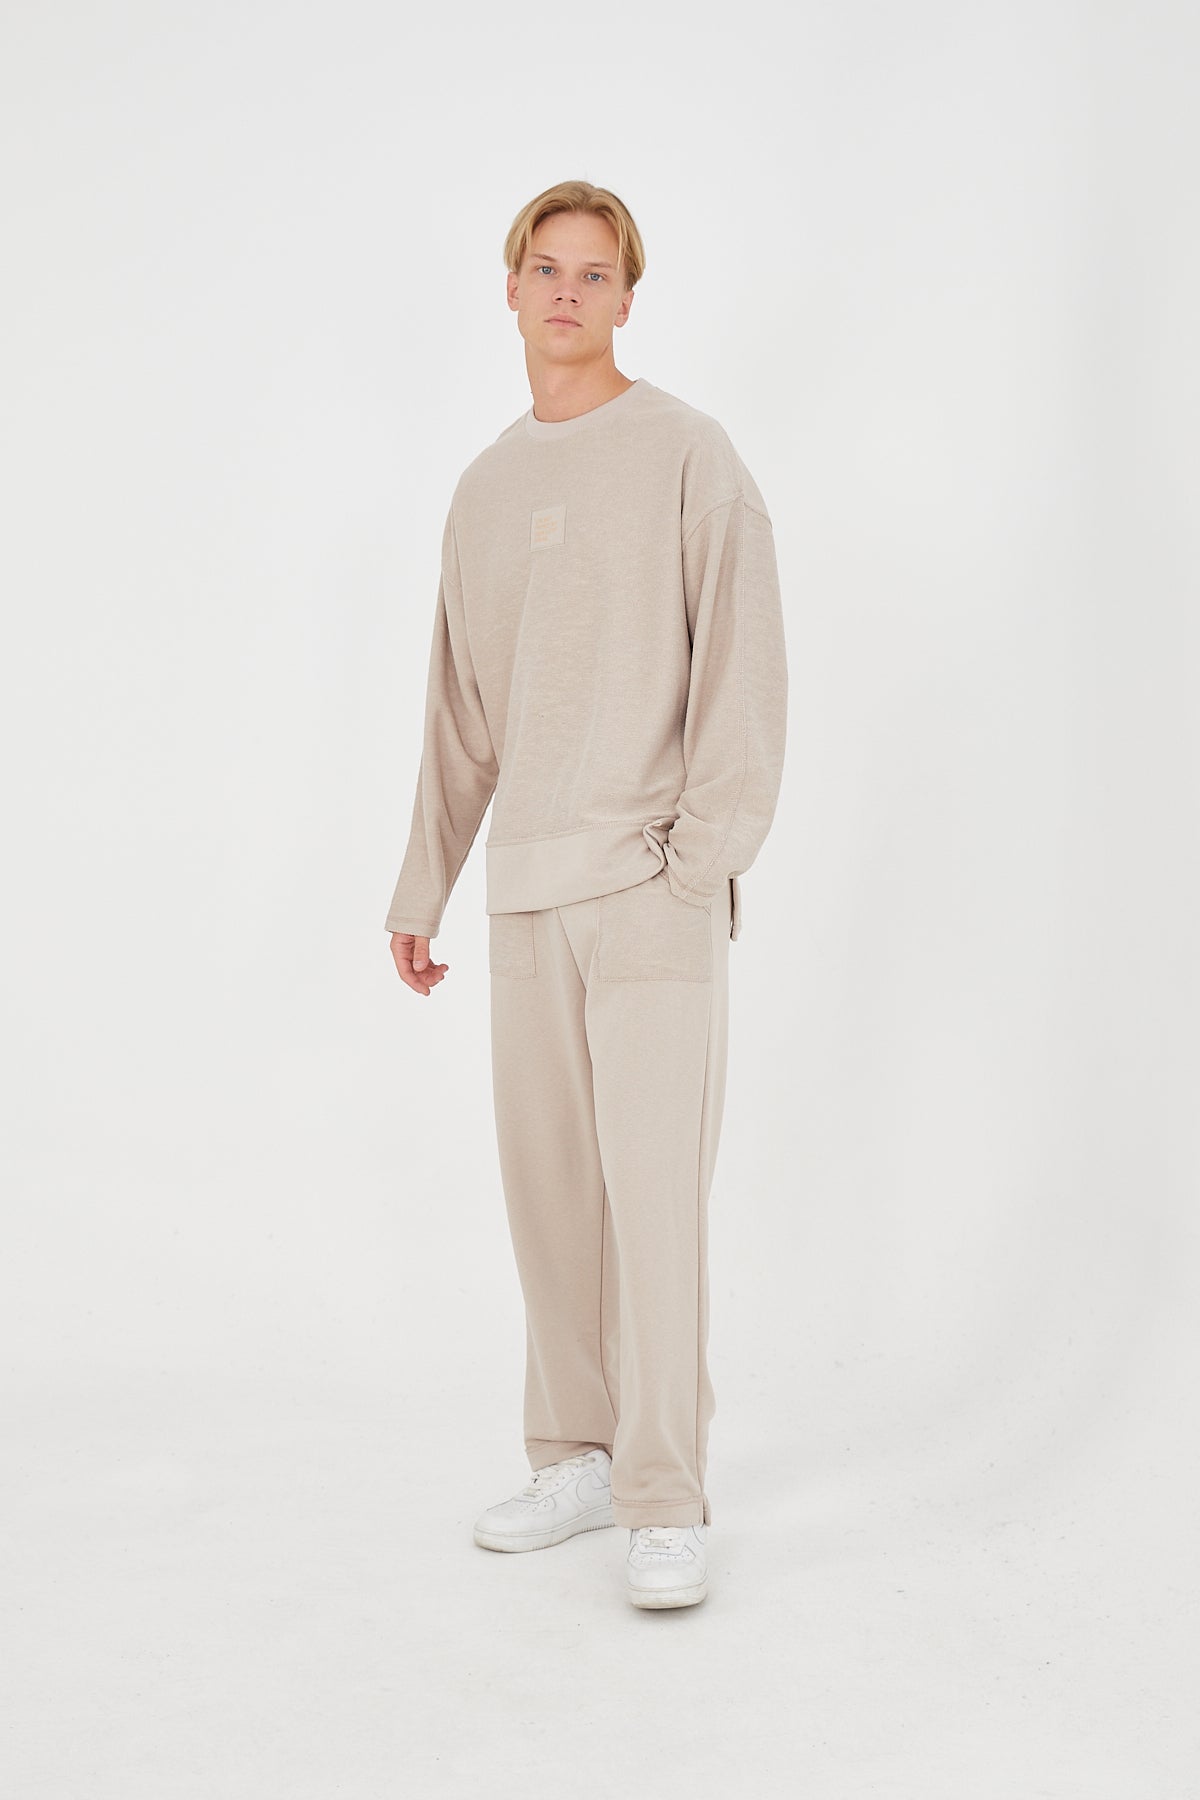 TRACKSUIT - THE PERFECT OUTFIT - BEIGE